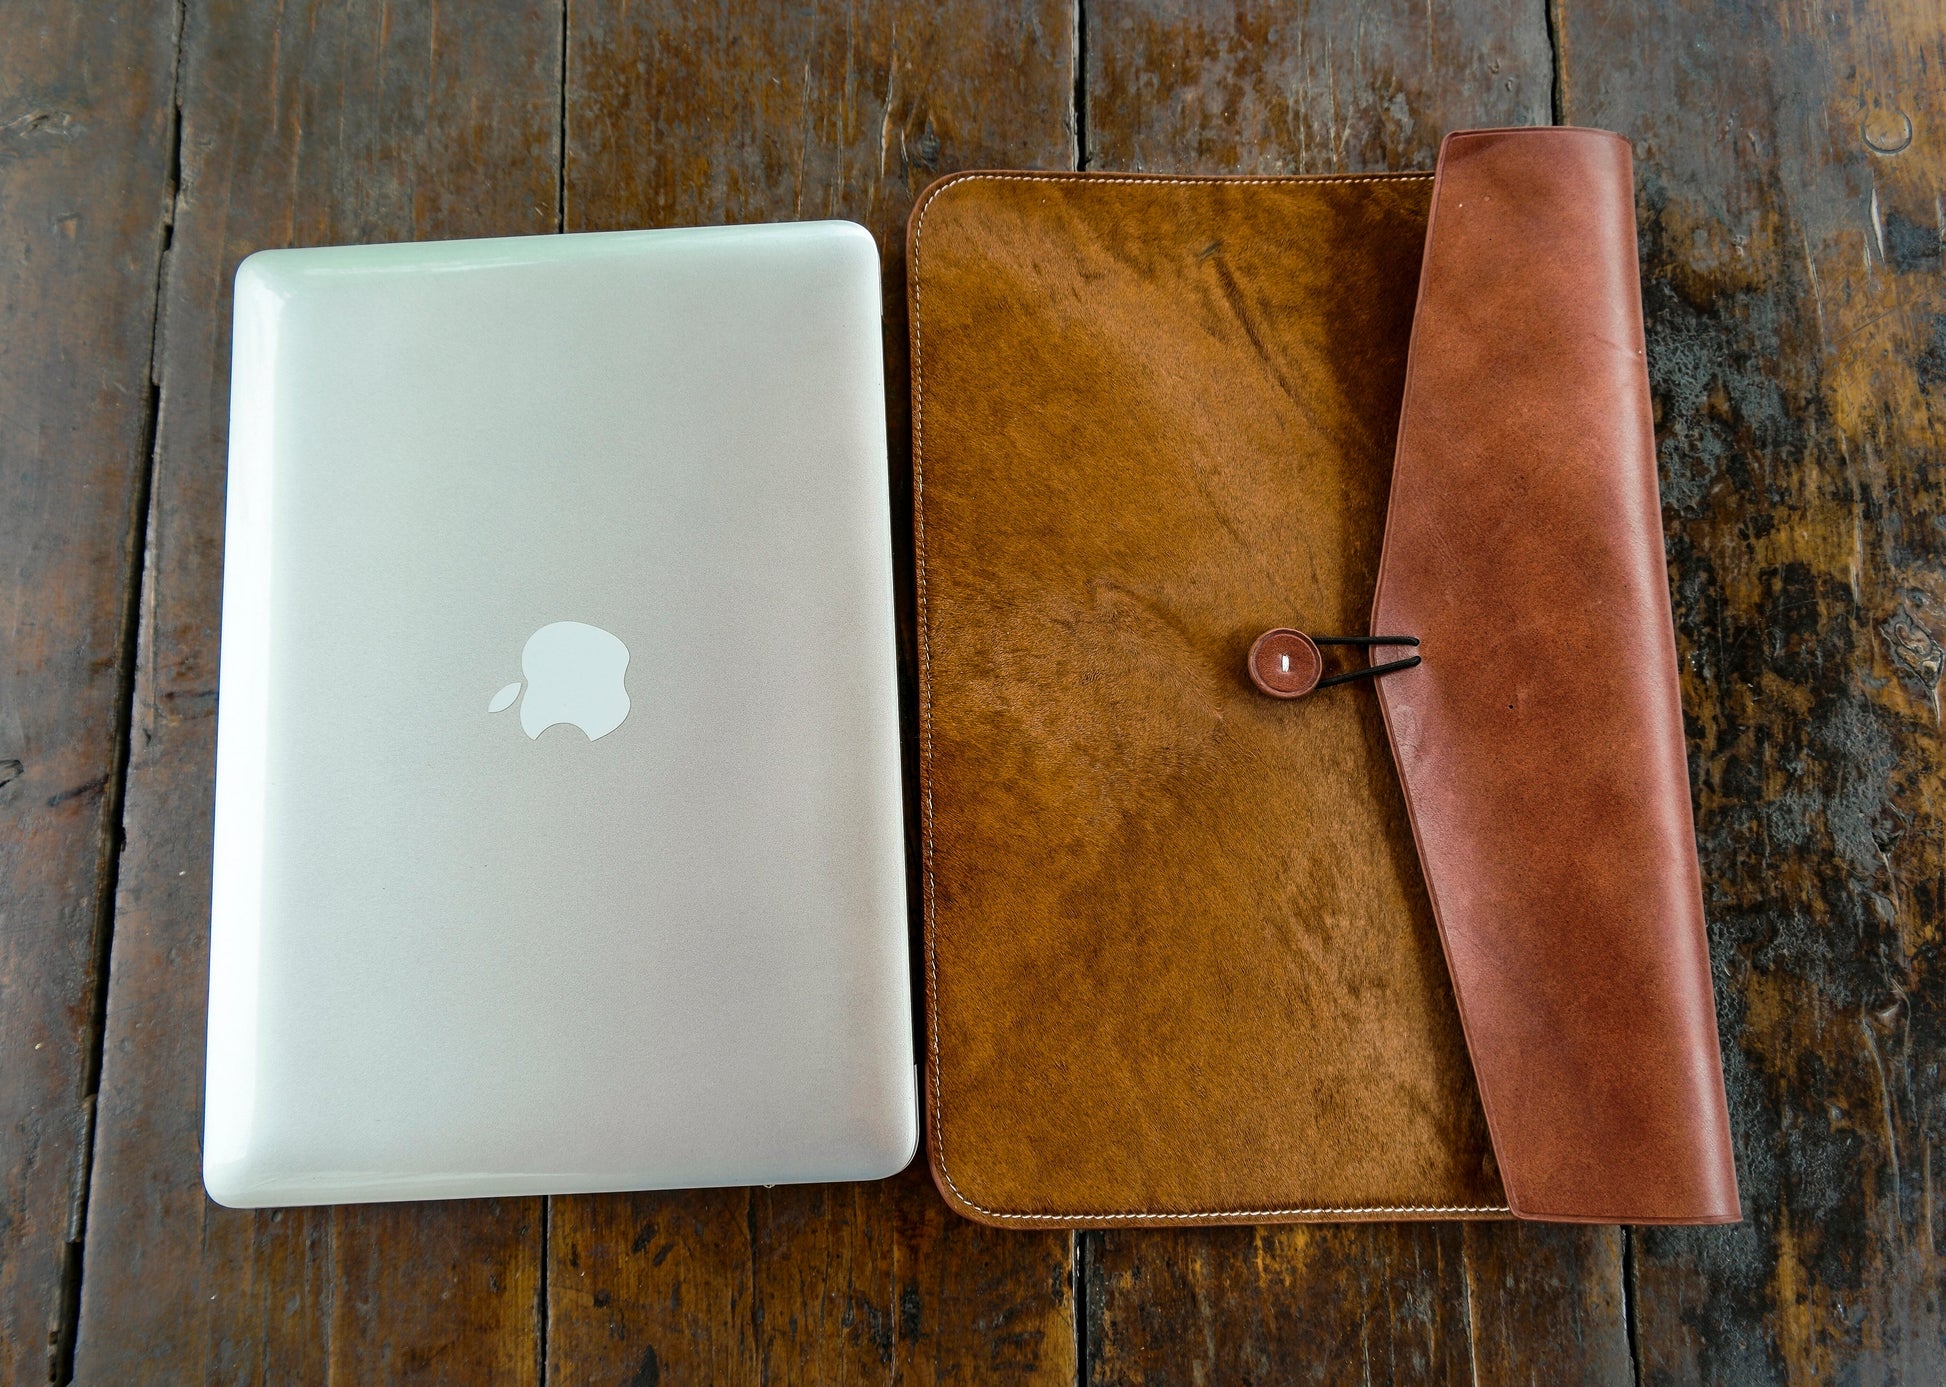 Leather laptop cover pattern/ Leather Laptop Carrying Cases & Sleeves pattern/Leather laptop bag pattern Laptop Case pattern Leather MacBook case/sleeve